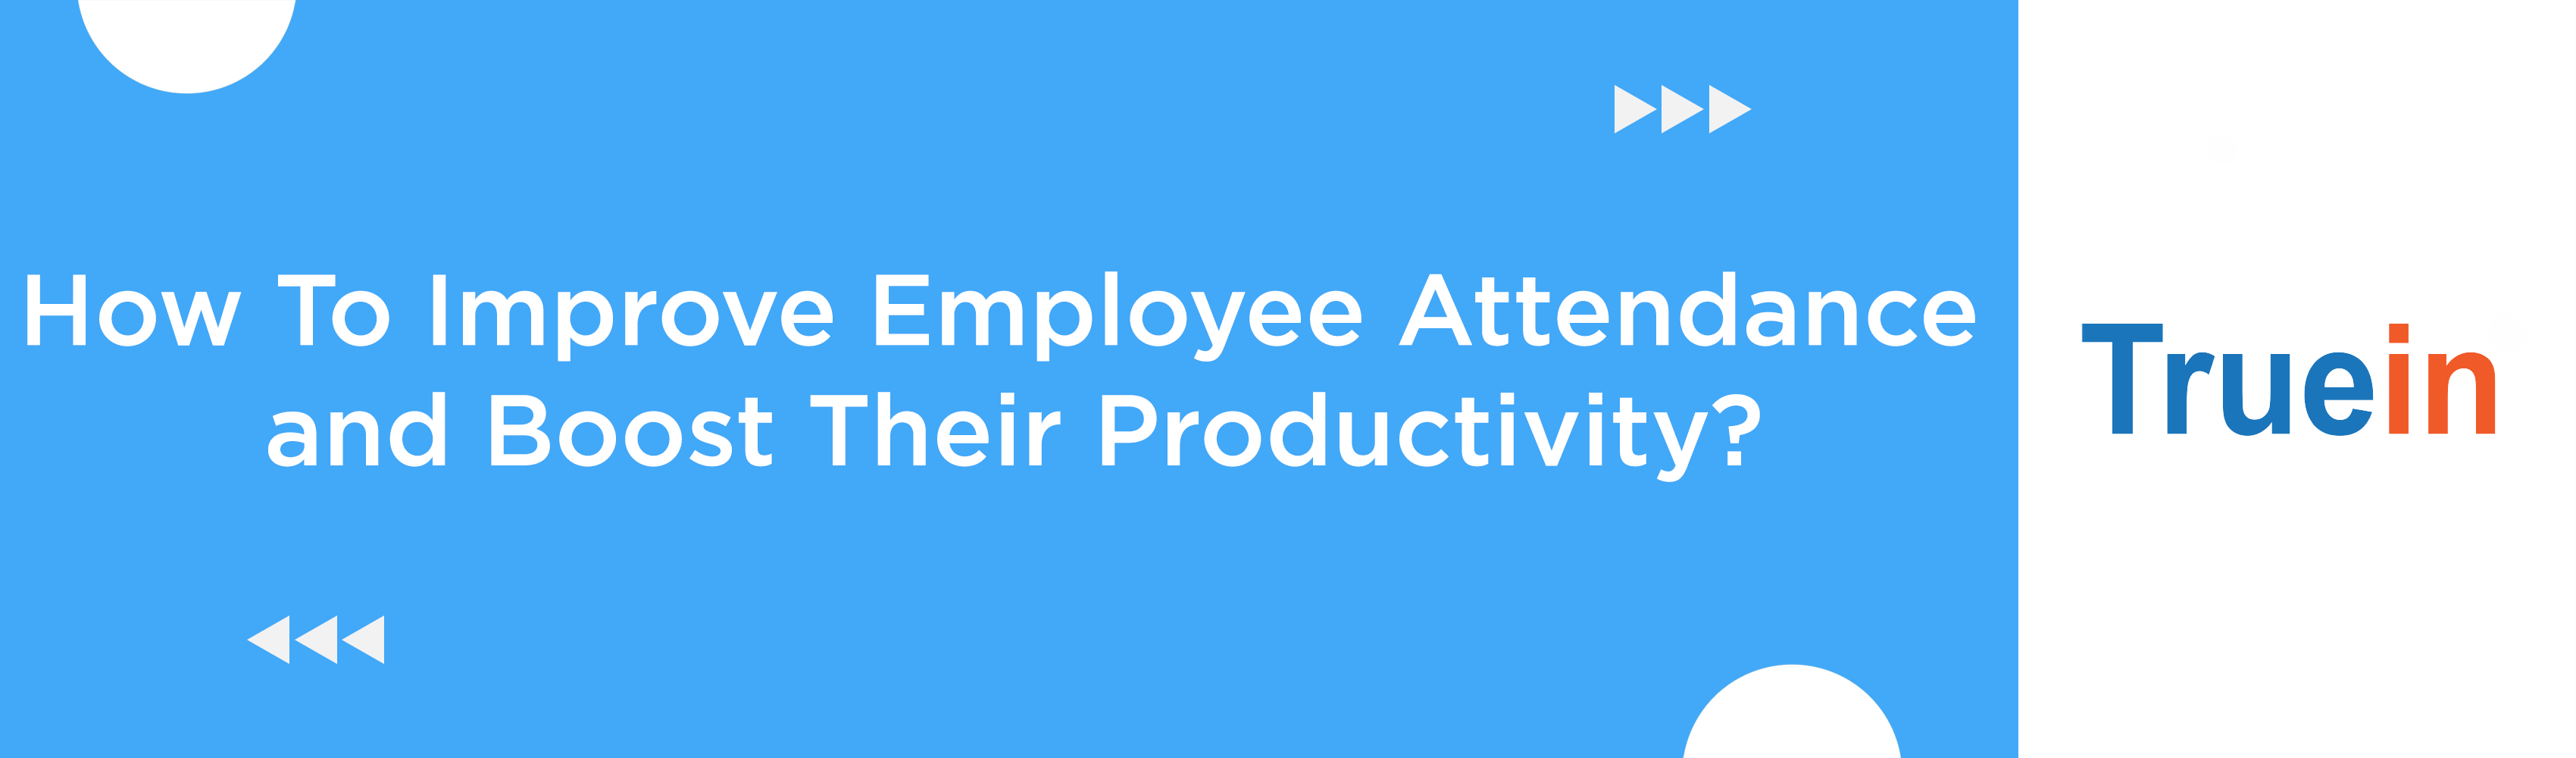 How To Improve Employee Attendance and Boost Their Productivity?